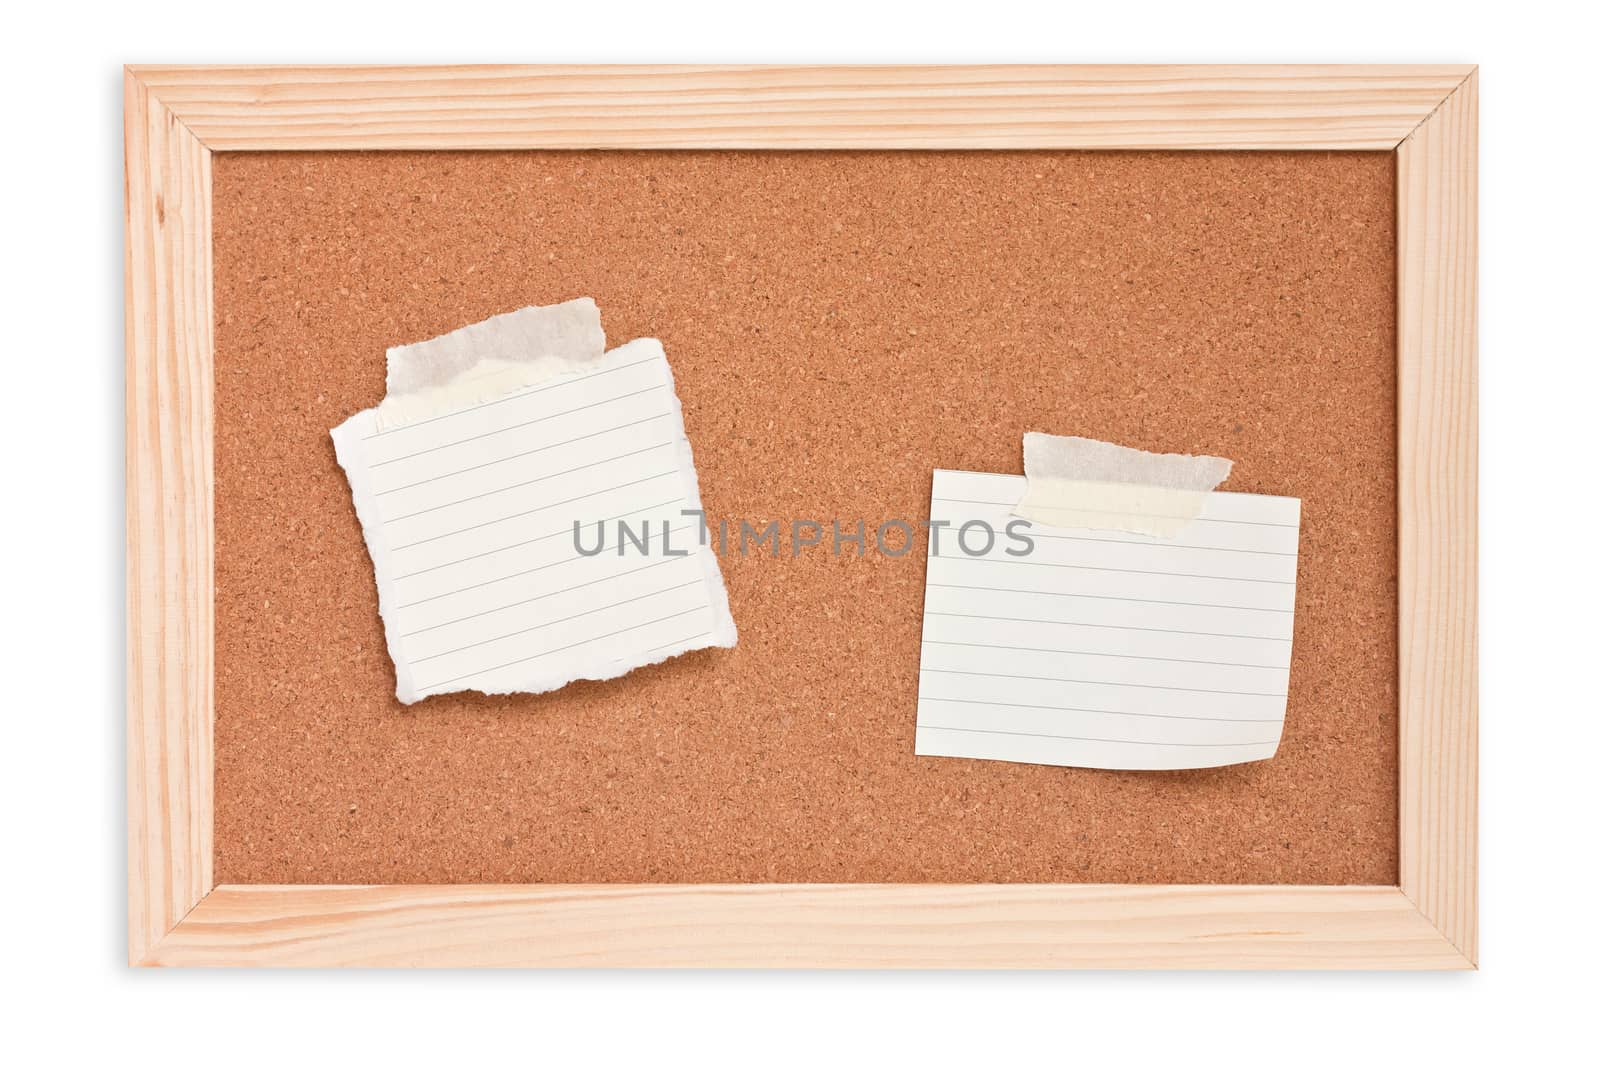 notepad on cork board isolated